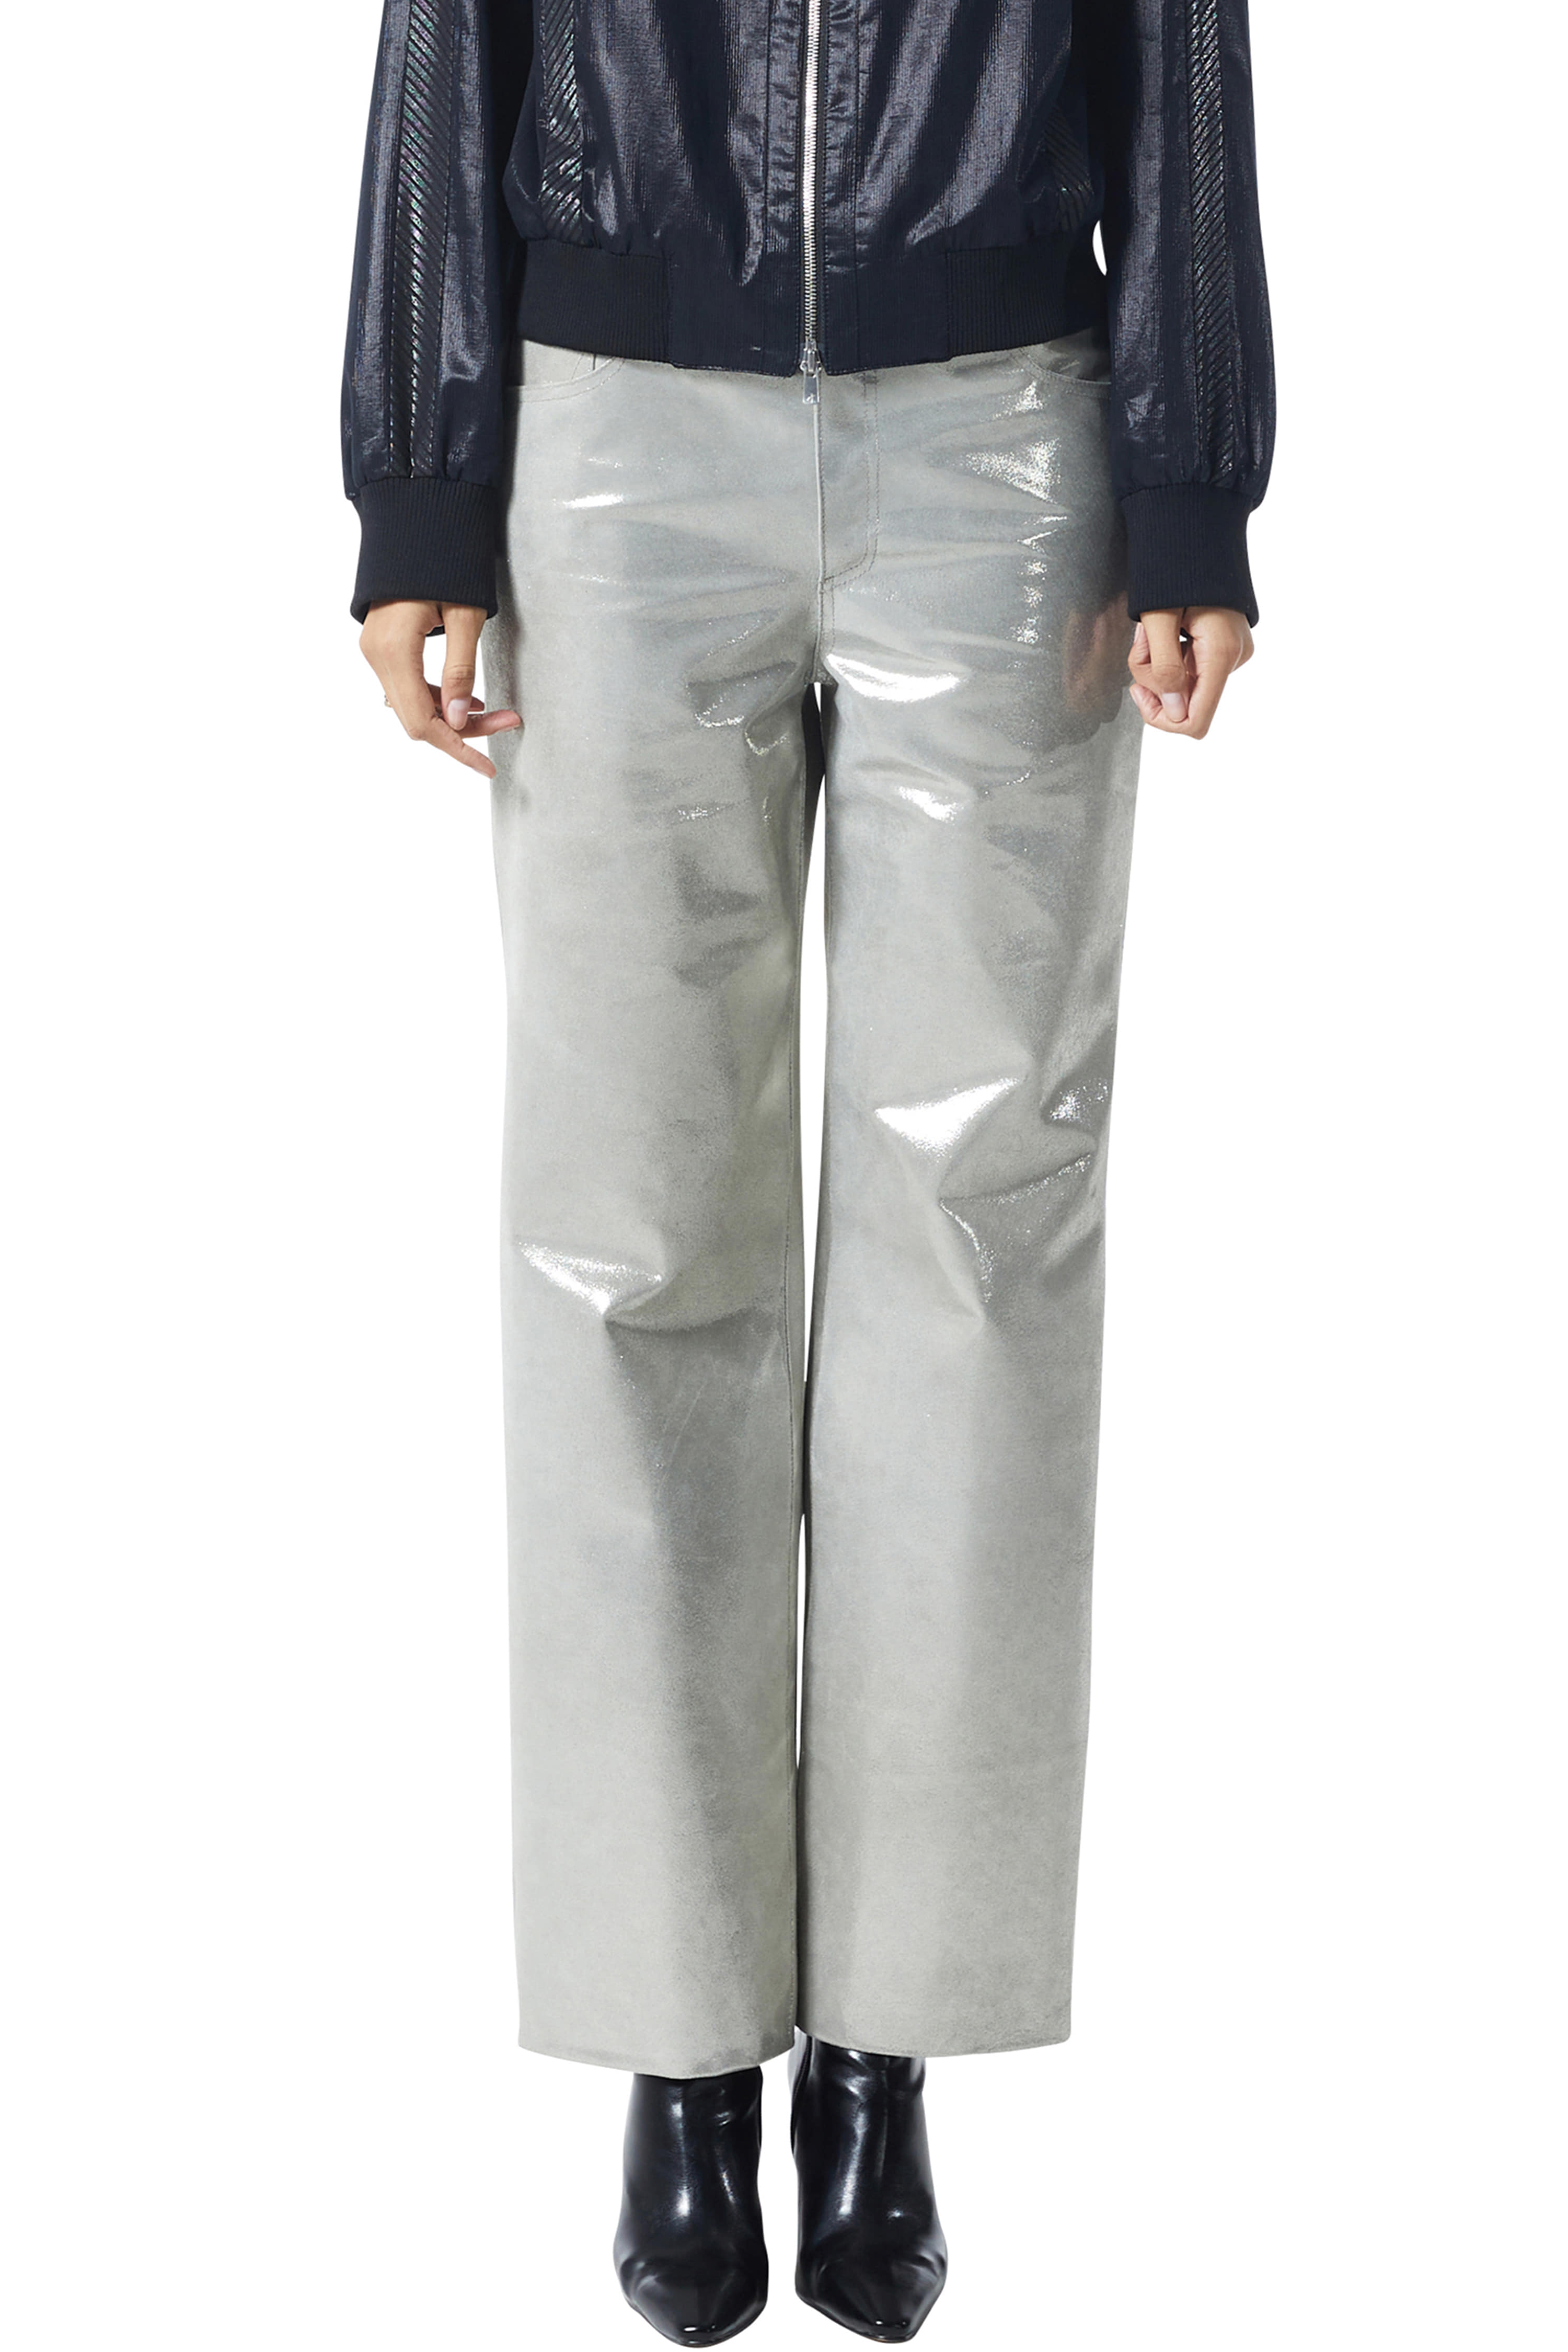 SILVER GLOSSY LEATHER PANTS